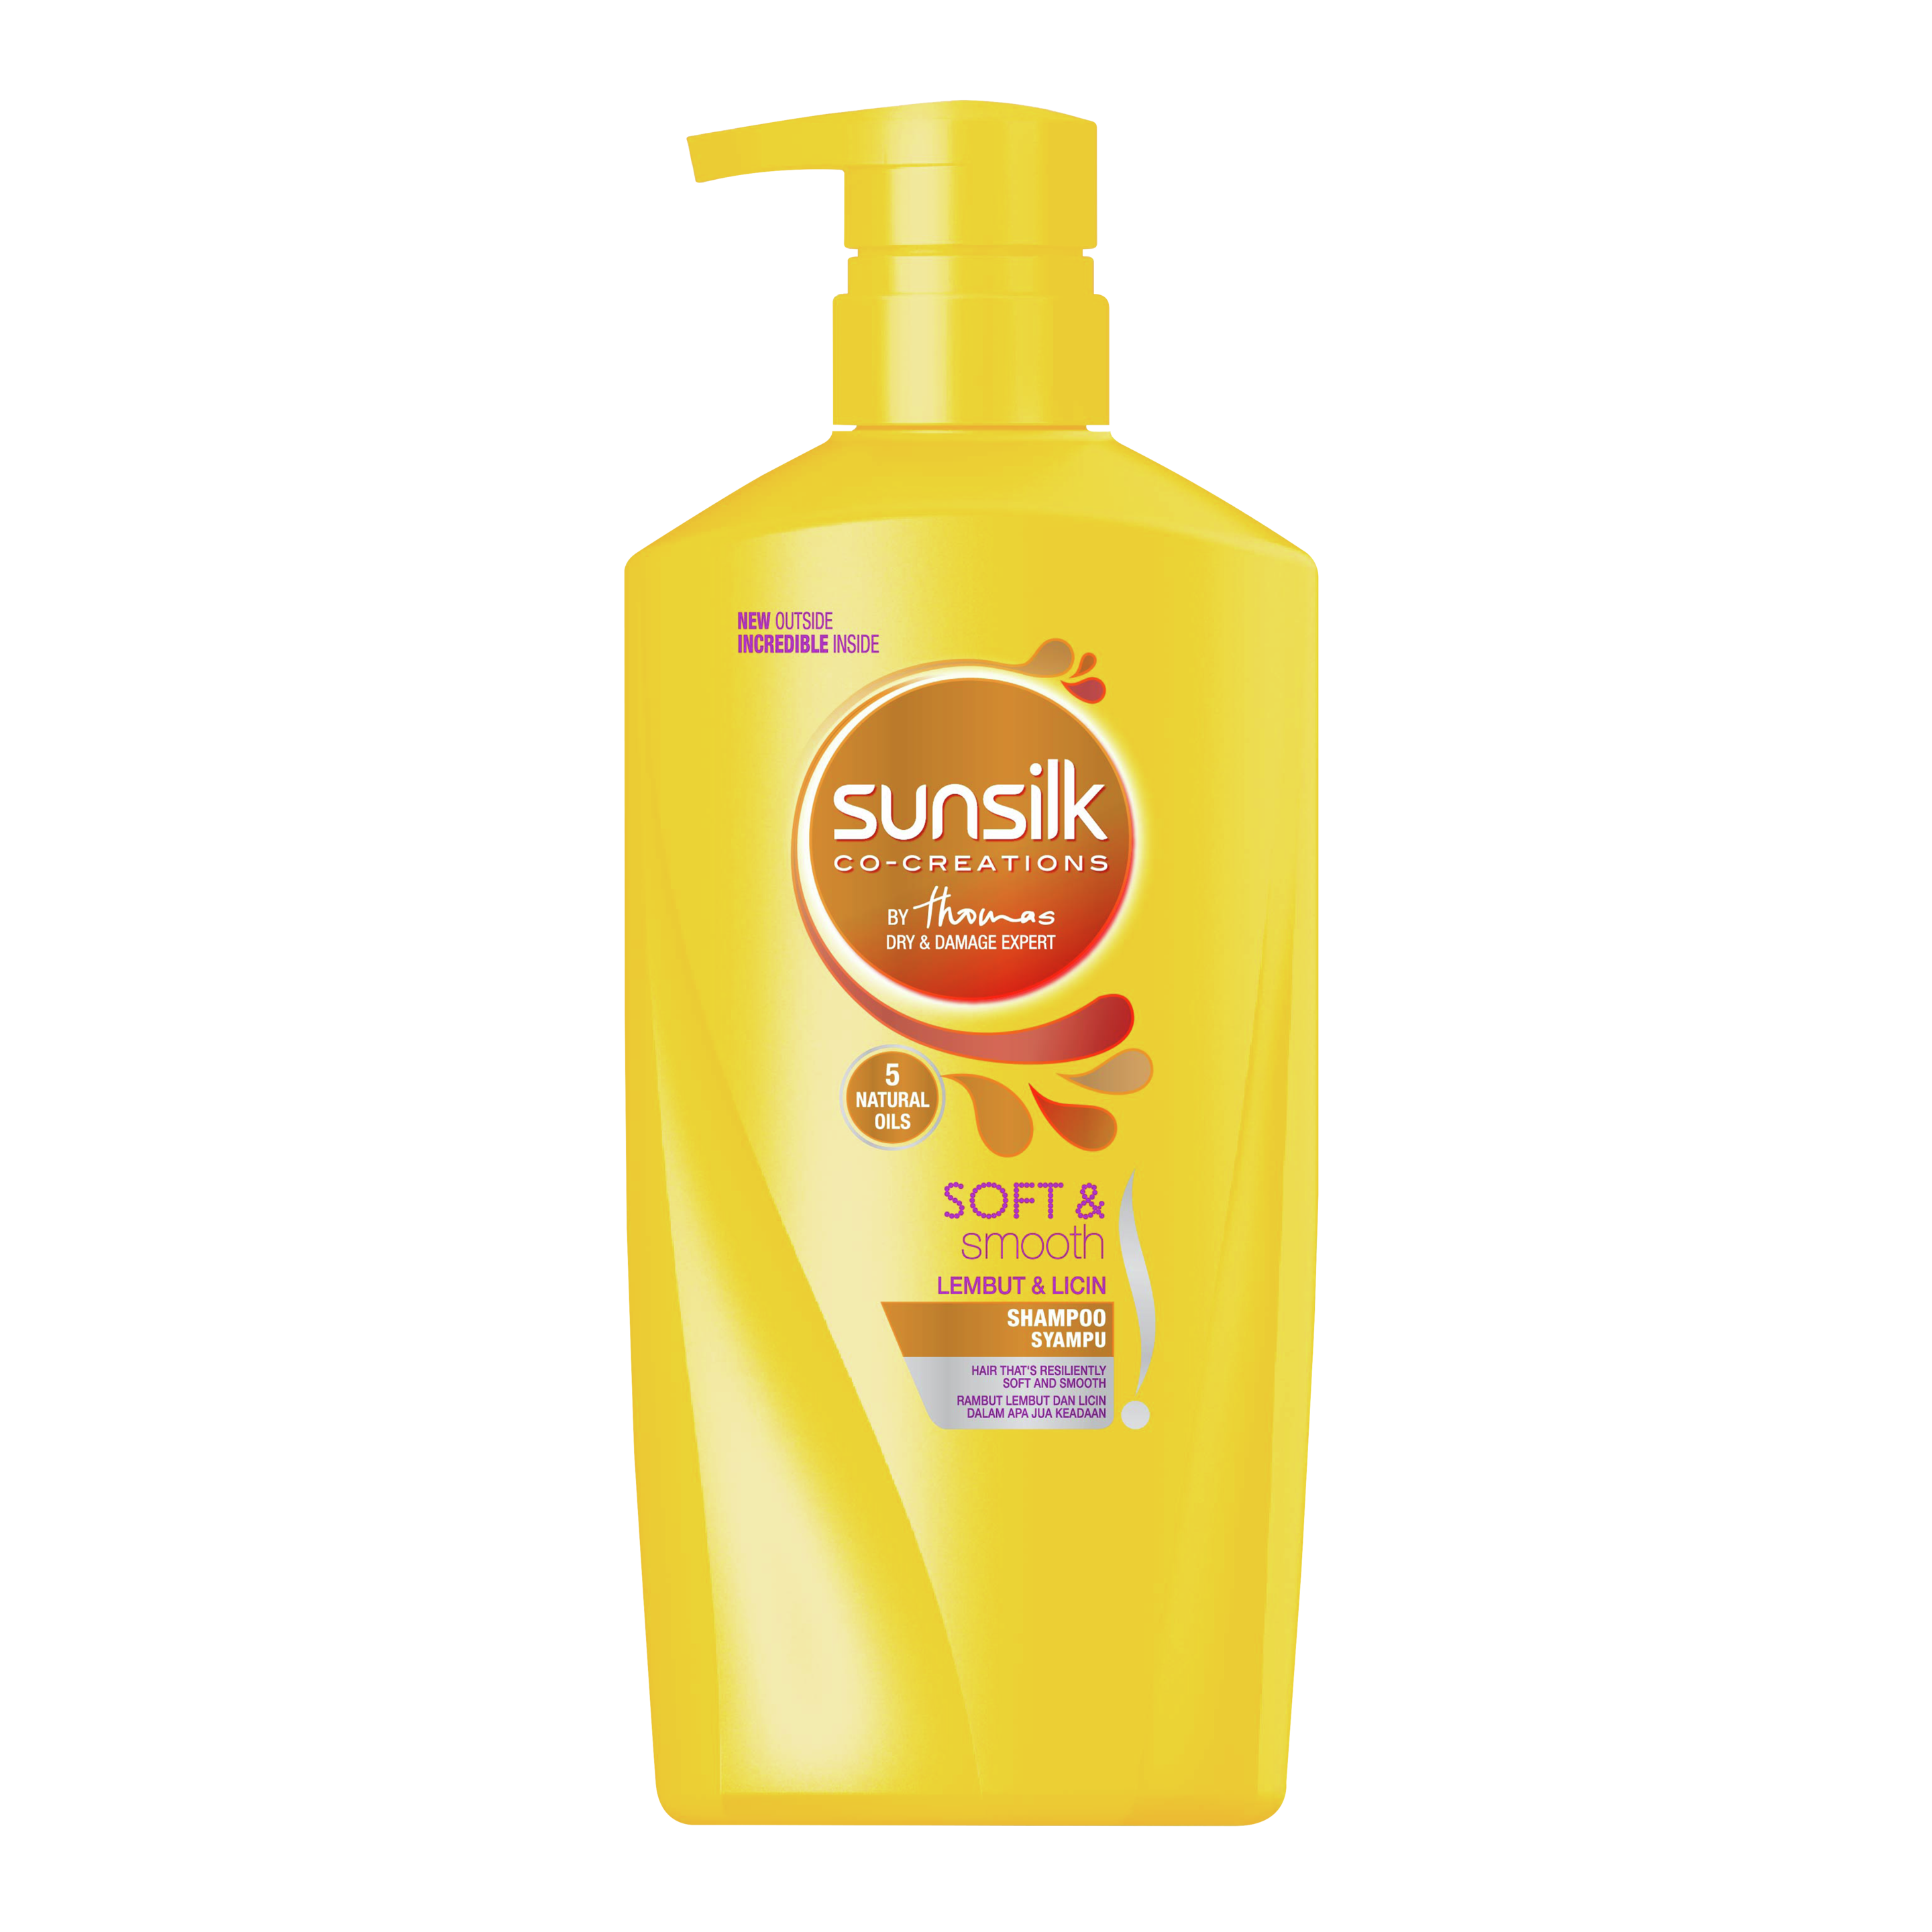 Sunsilk Soft and Smooth Shampoo 650ml front of pack image